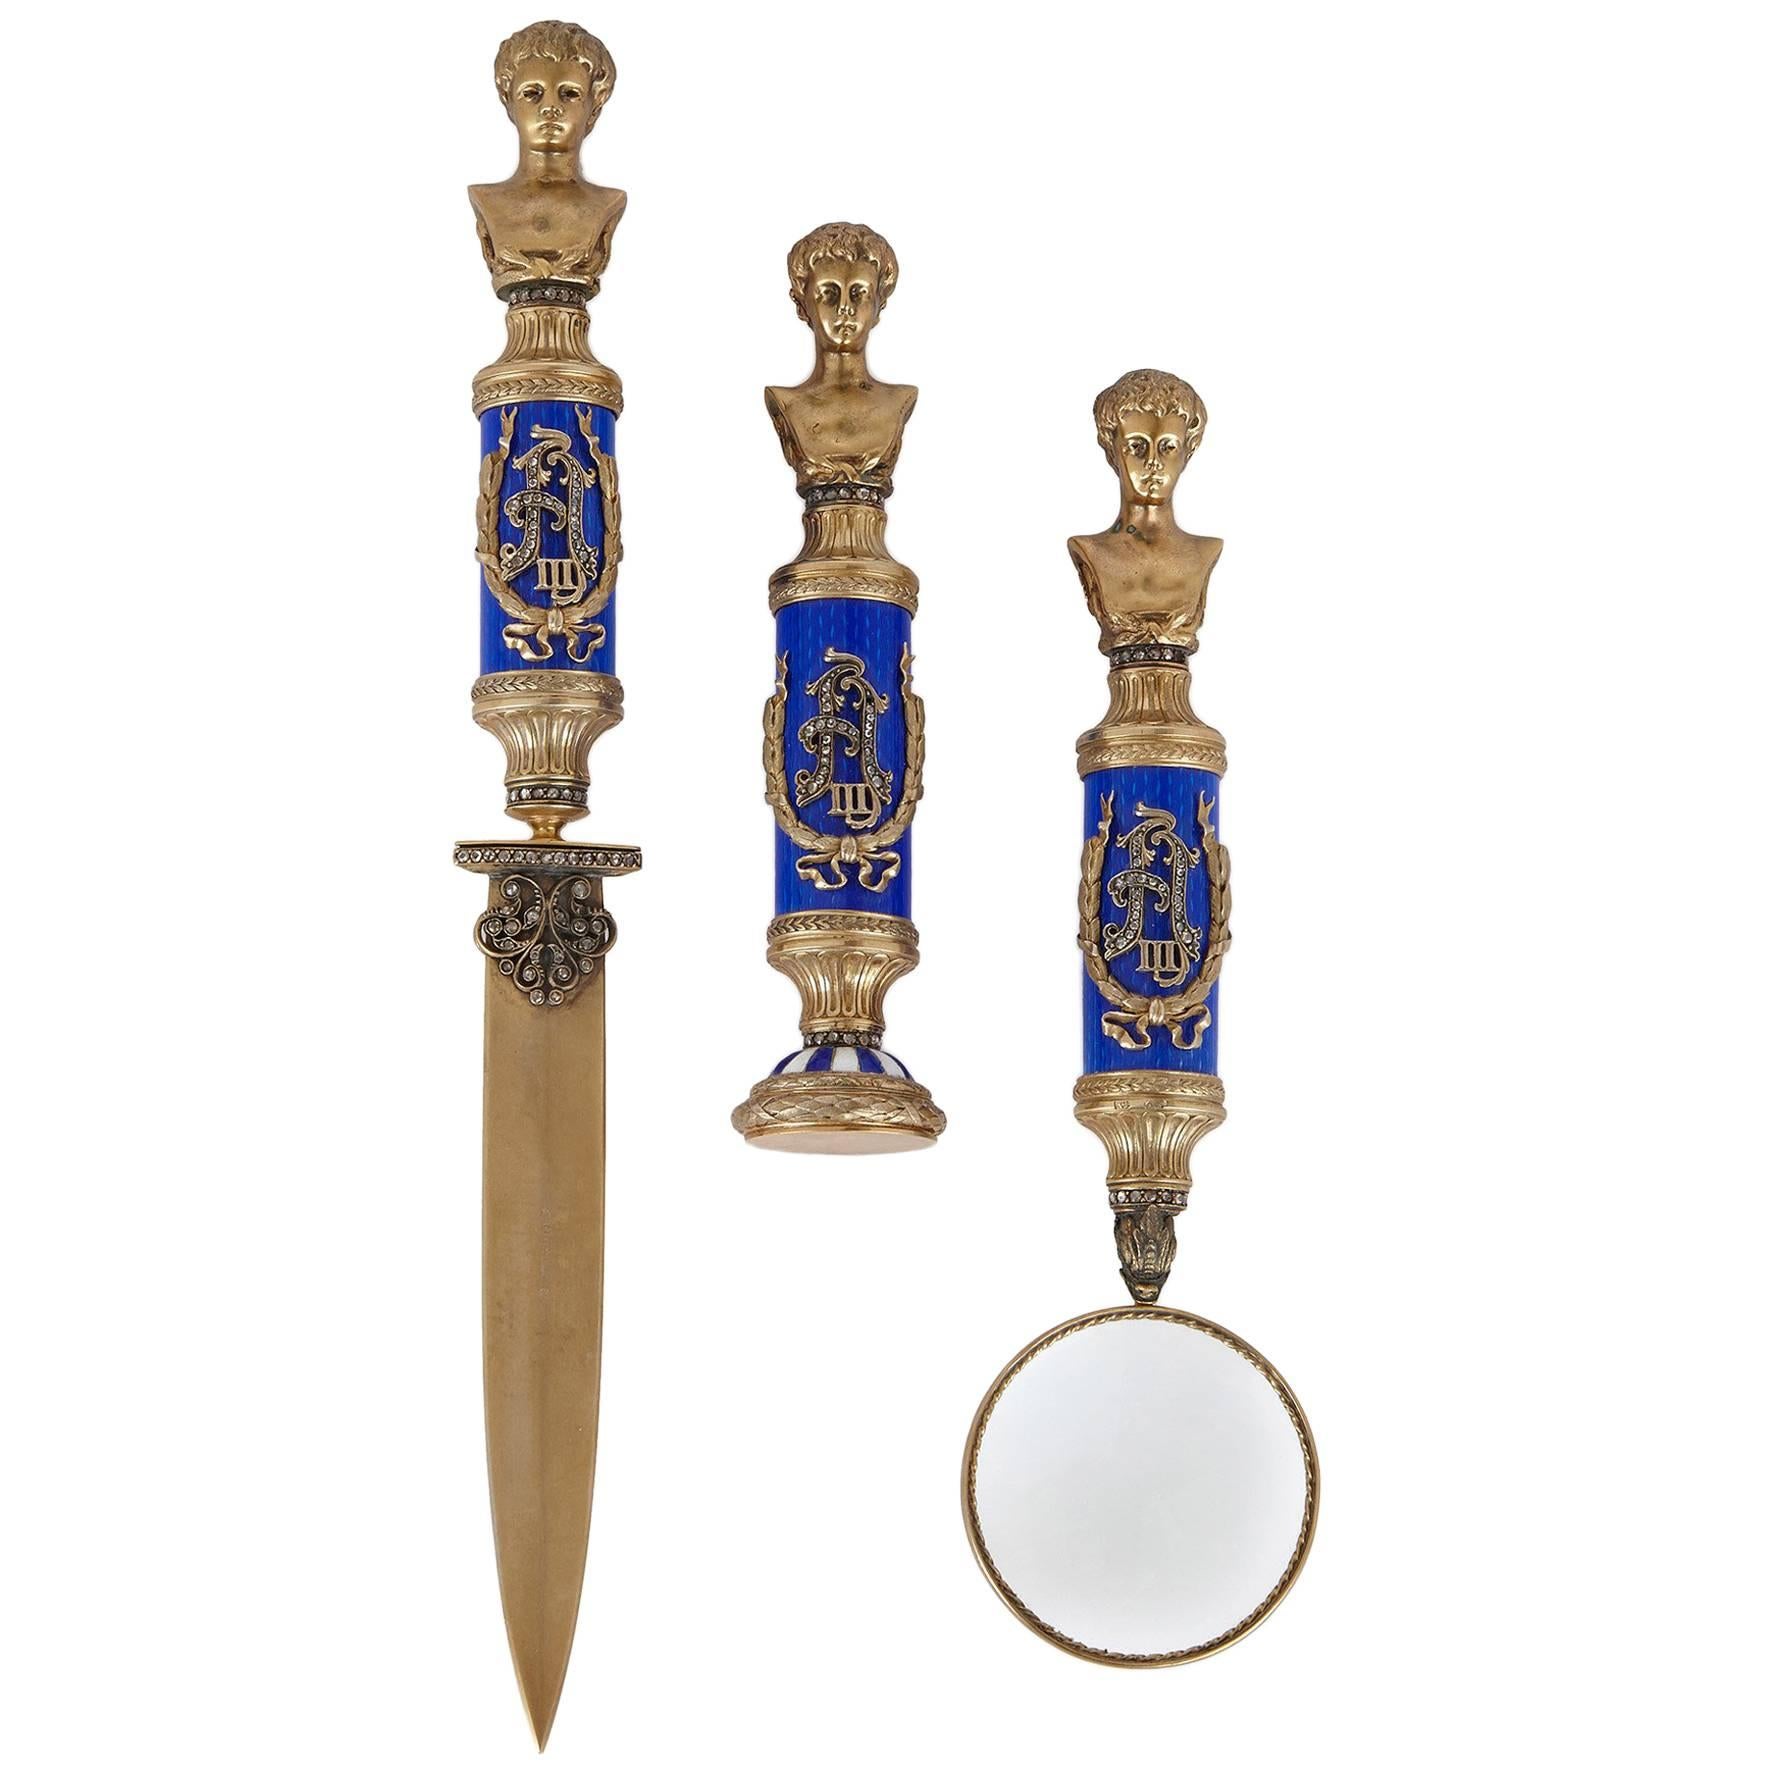 Fabergé Style Three-Piece Russian Desk Set in Diamond, Enamel and Silver Gilt